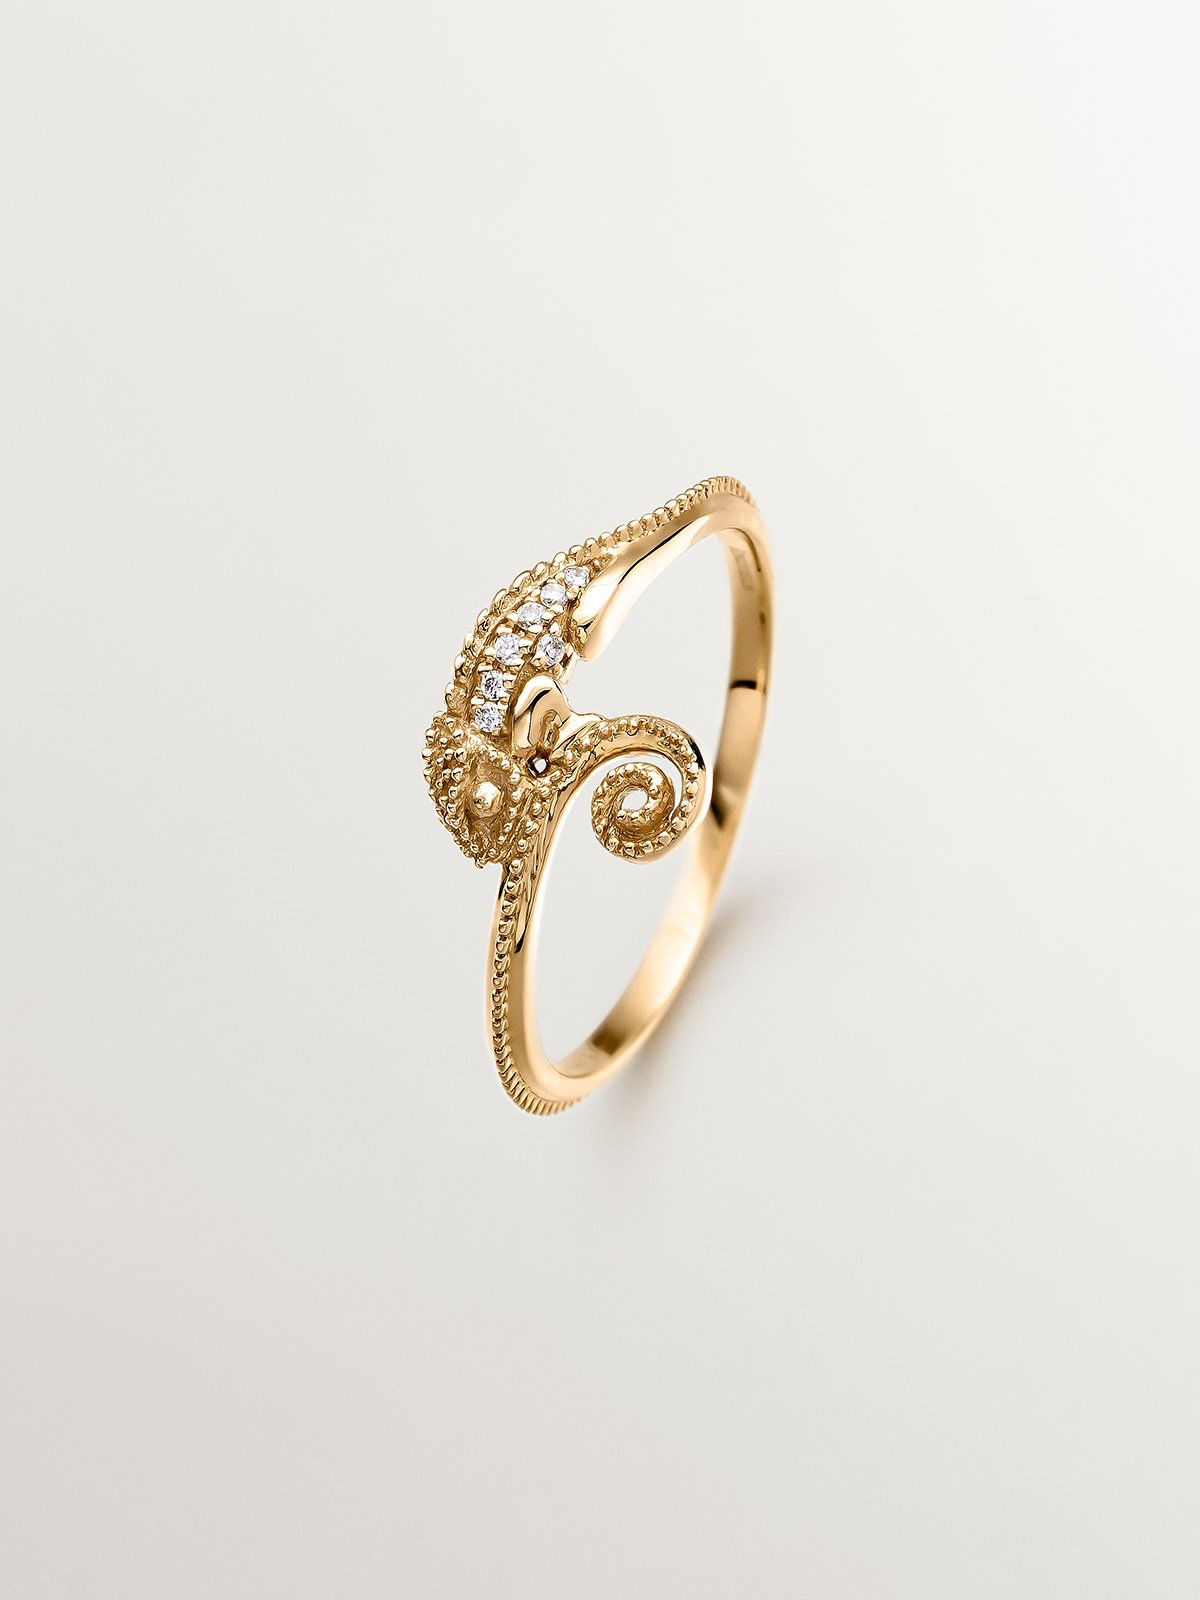 18K Yellow Gold Ring with Chameleon and Diamonds